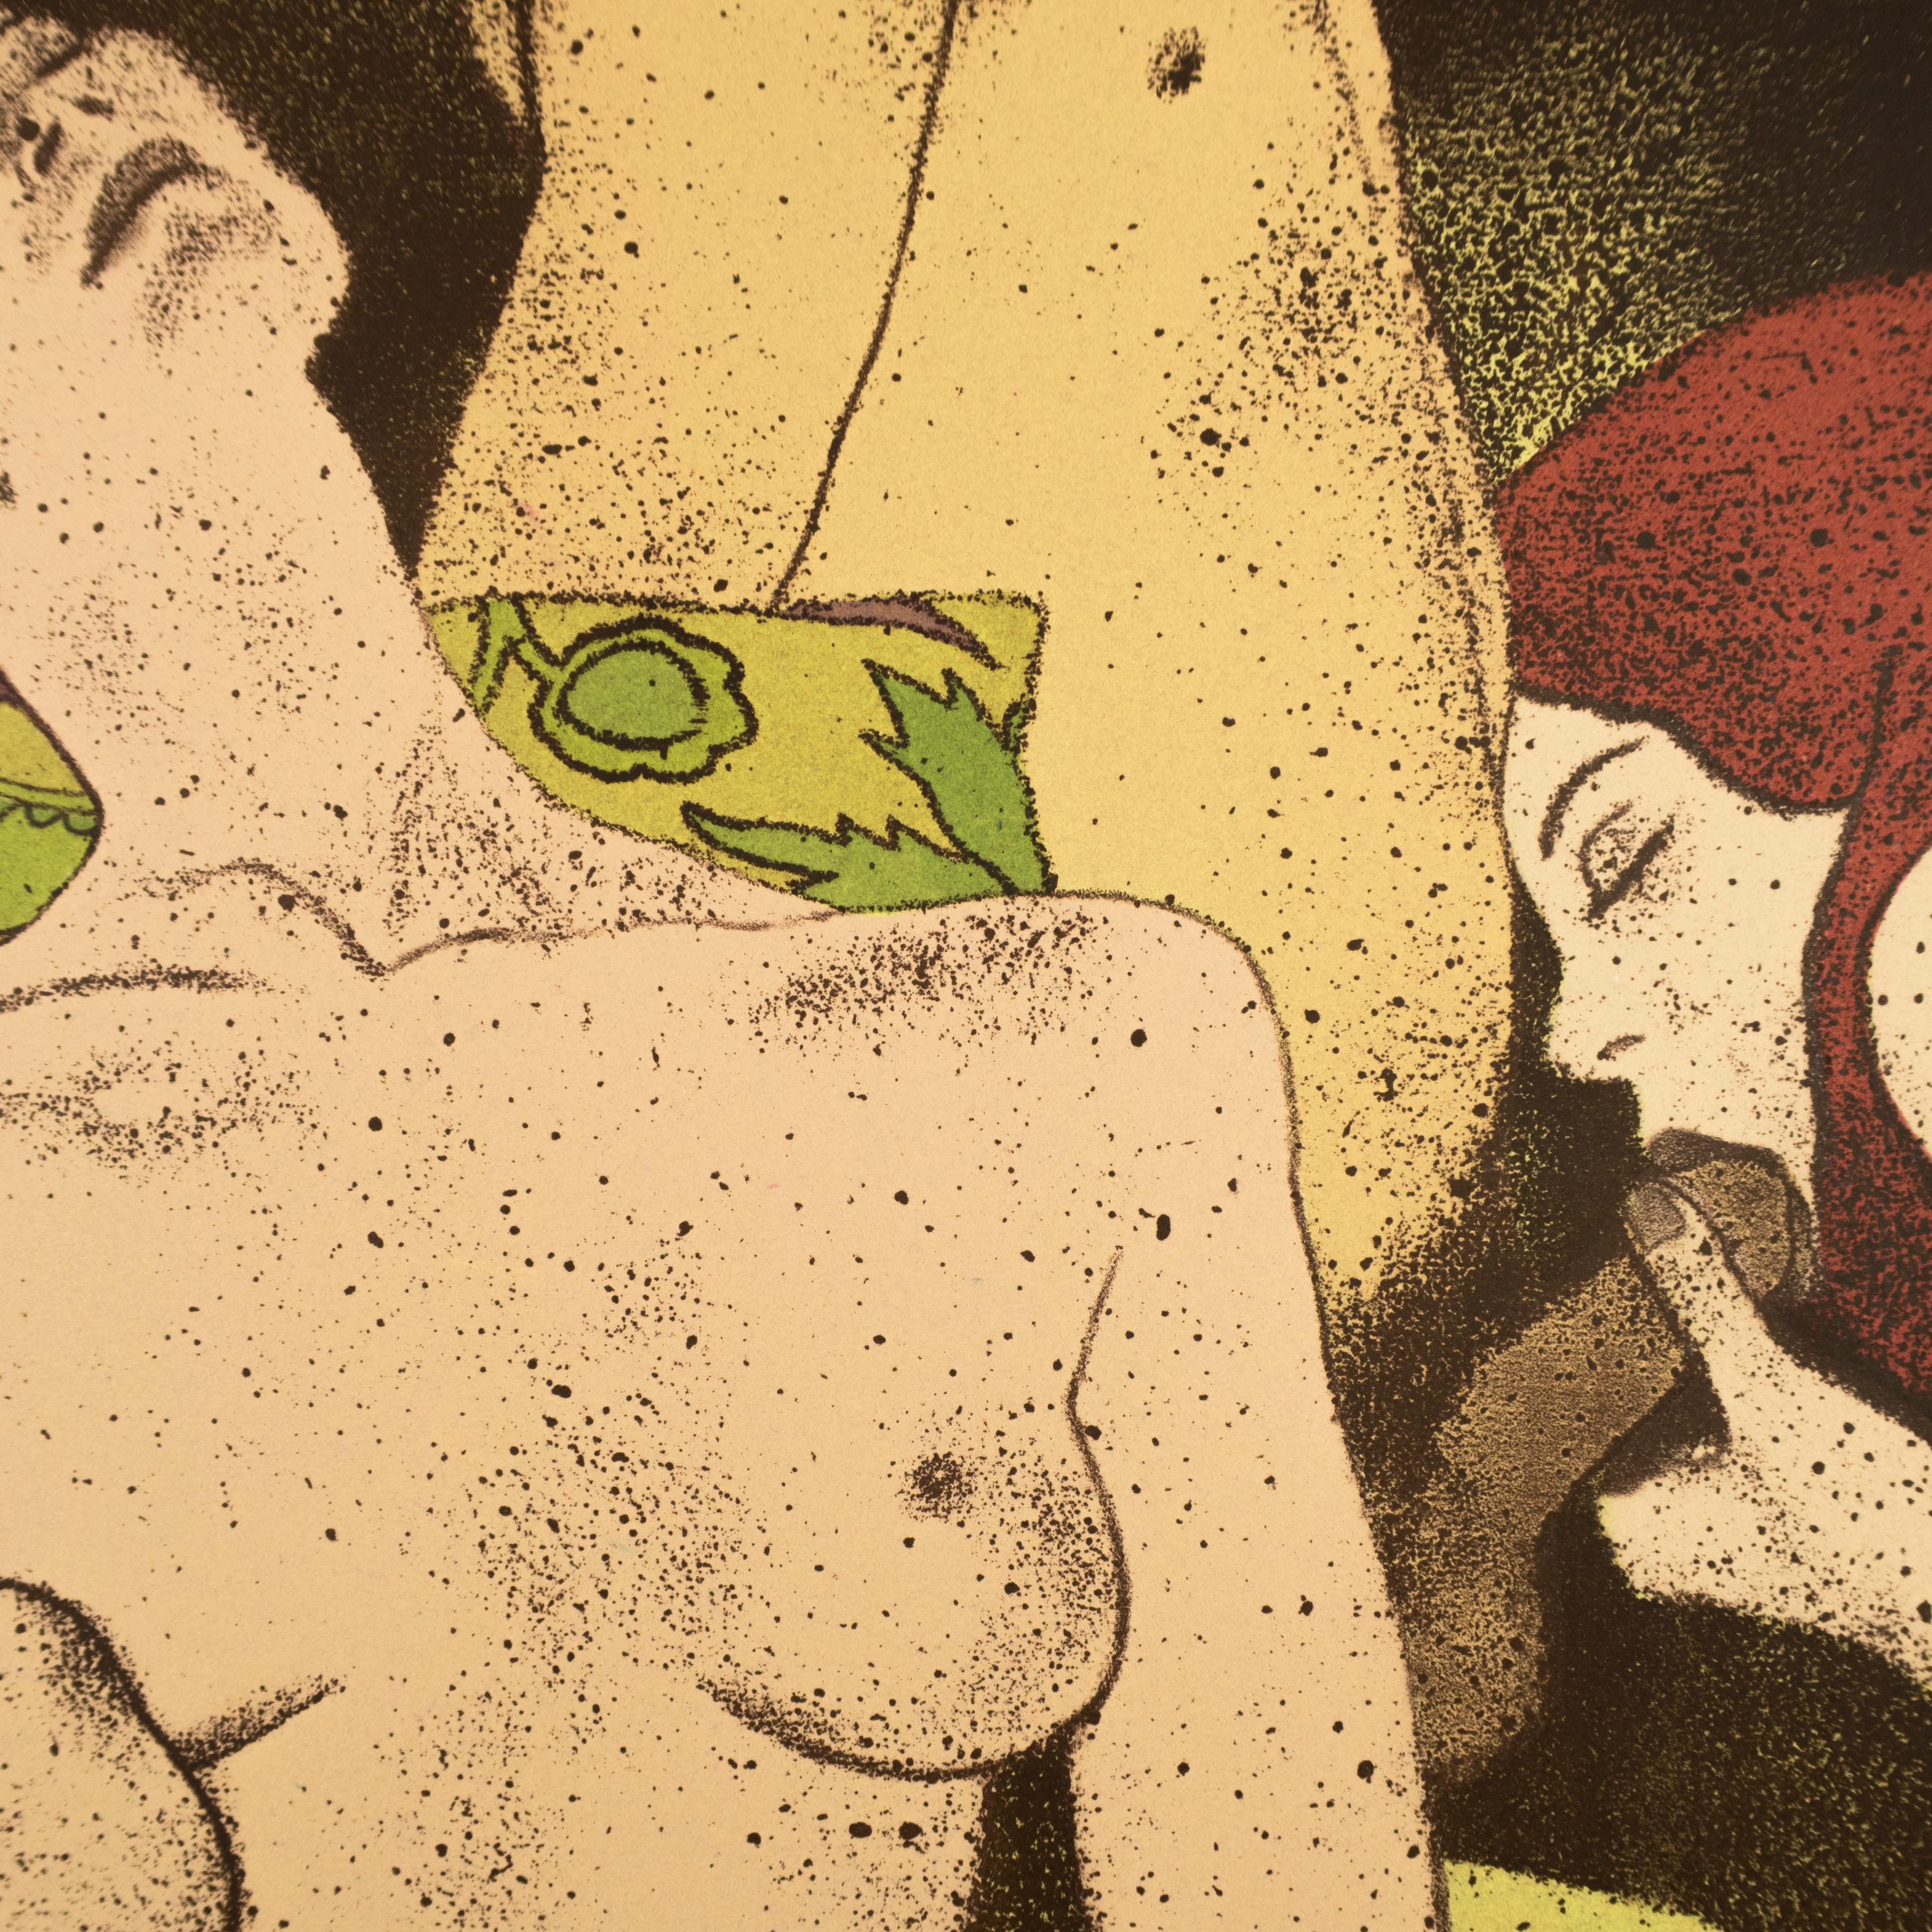 A Rash Act: erotic drawing of nude blonde, redhead, and man with art deco motifs - Realist Print by Ronald Brooks Kitaj